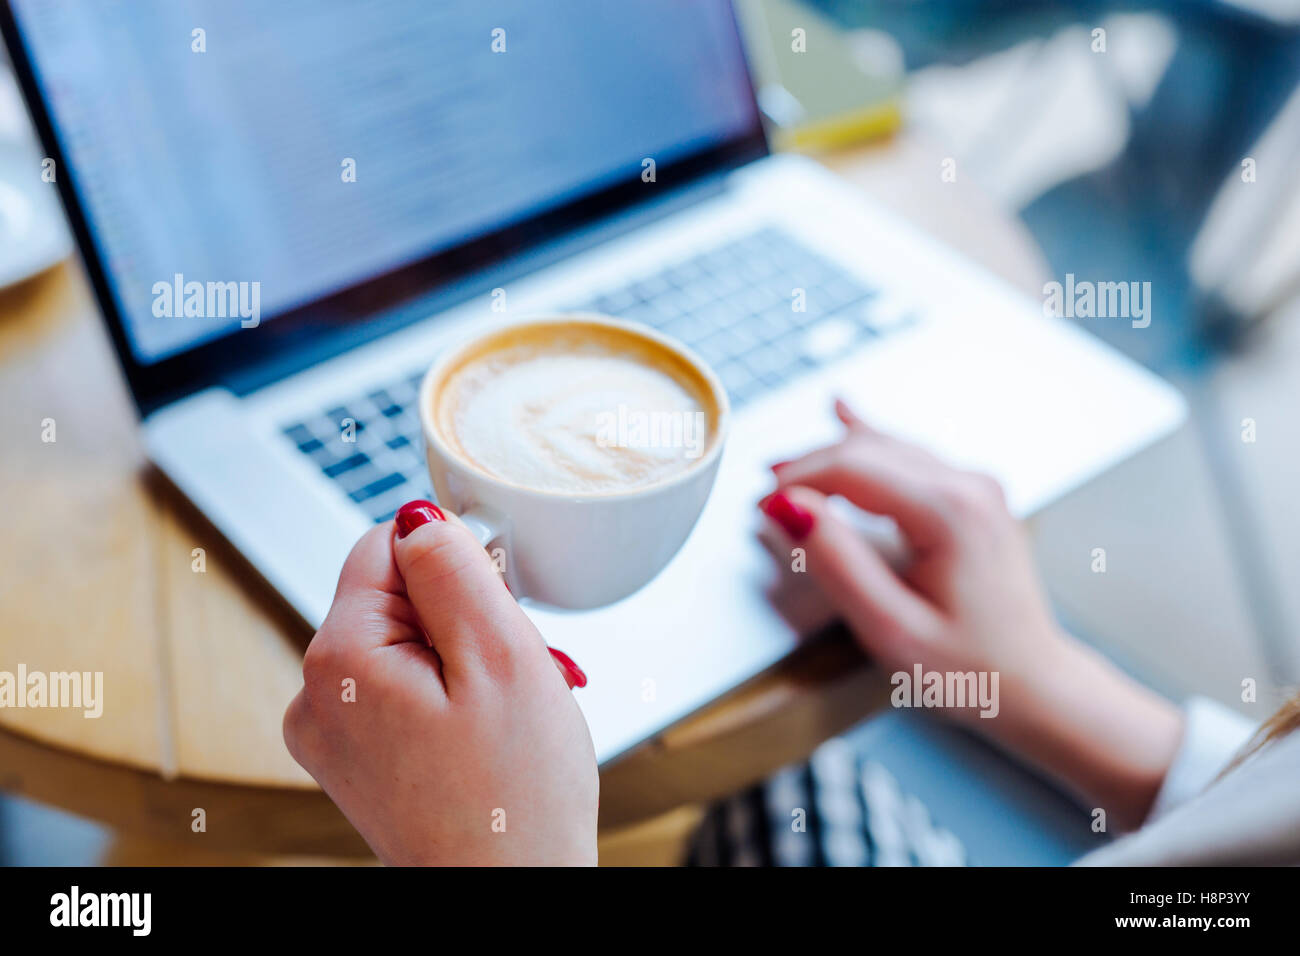 Unrecognizable Woman Drinking Coffee in Coffee Shop Stock Photo